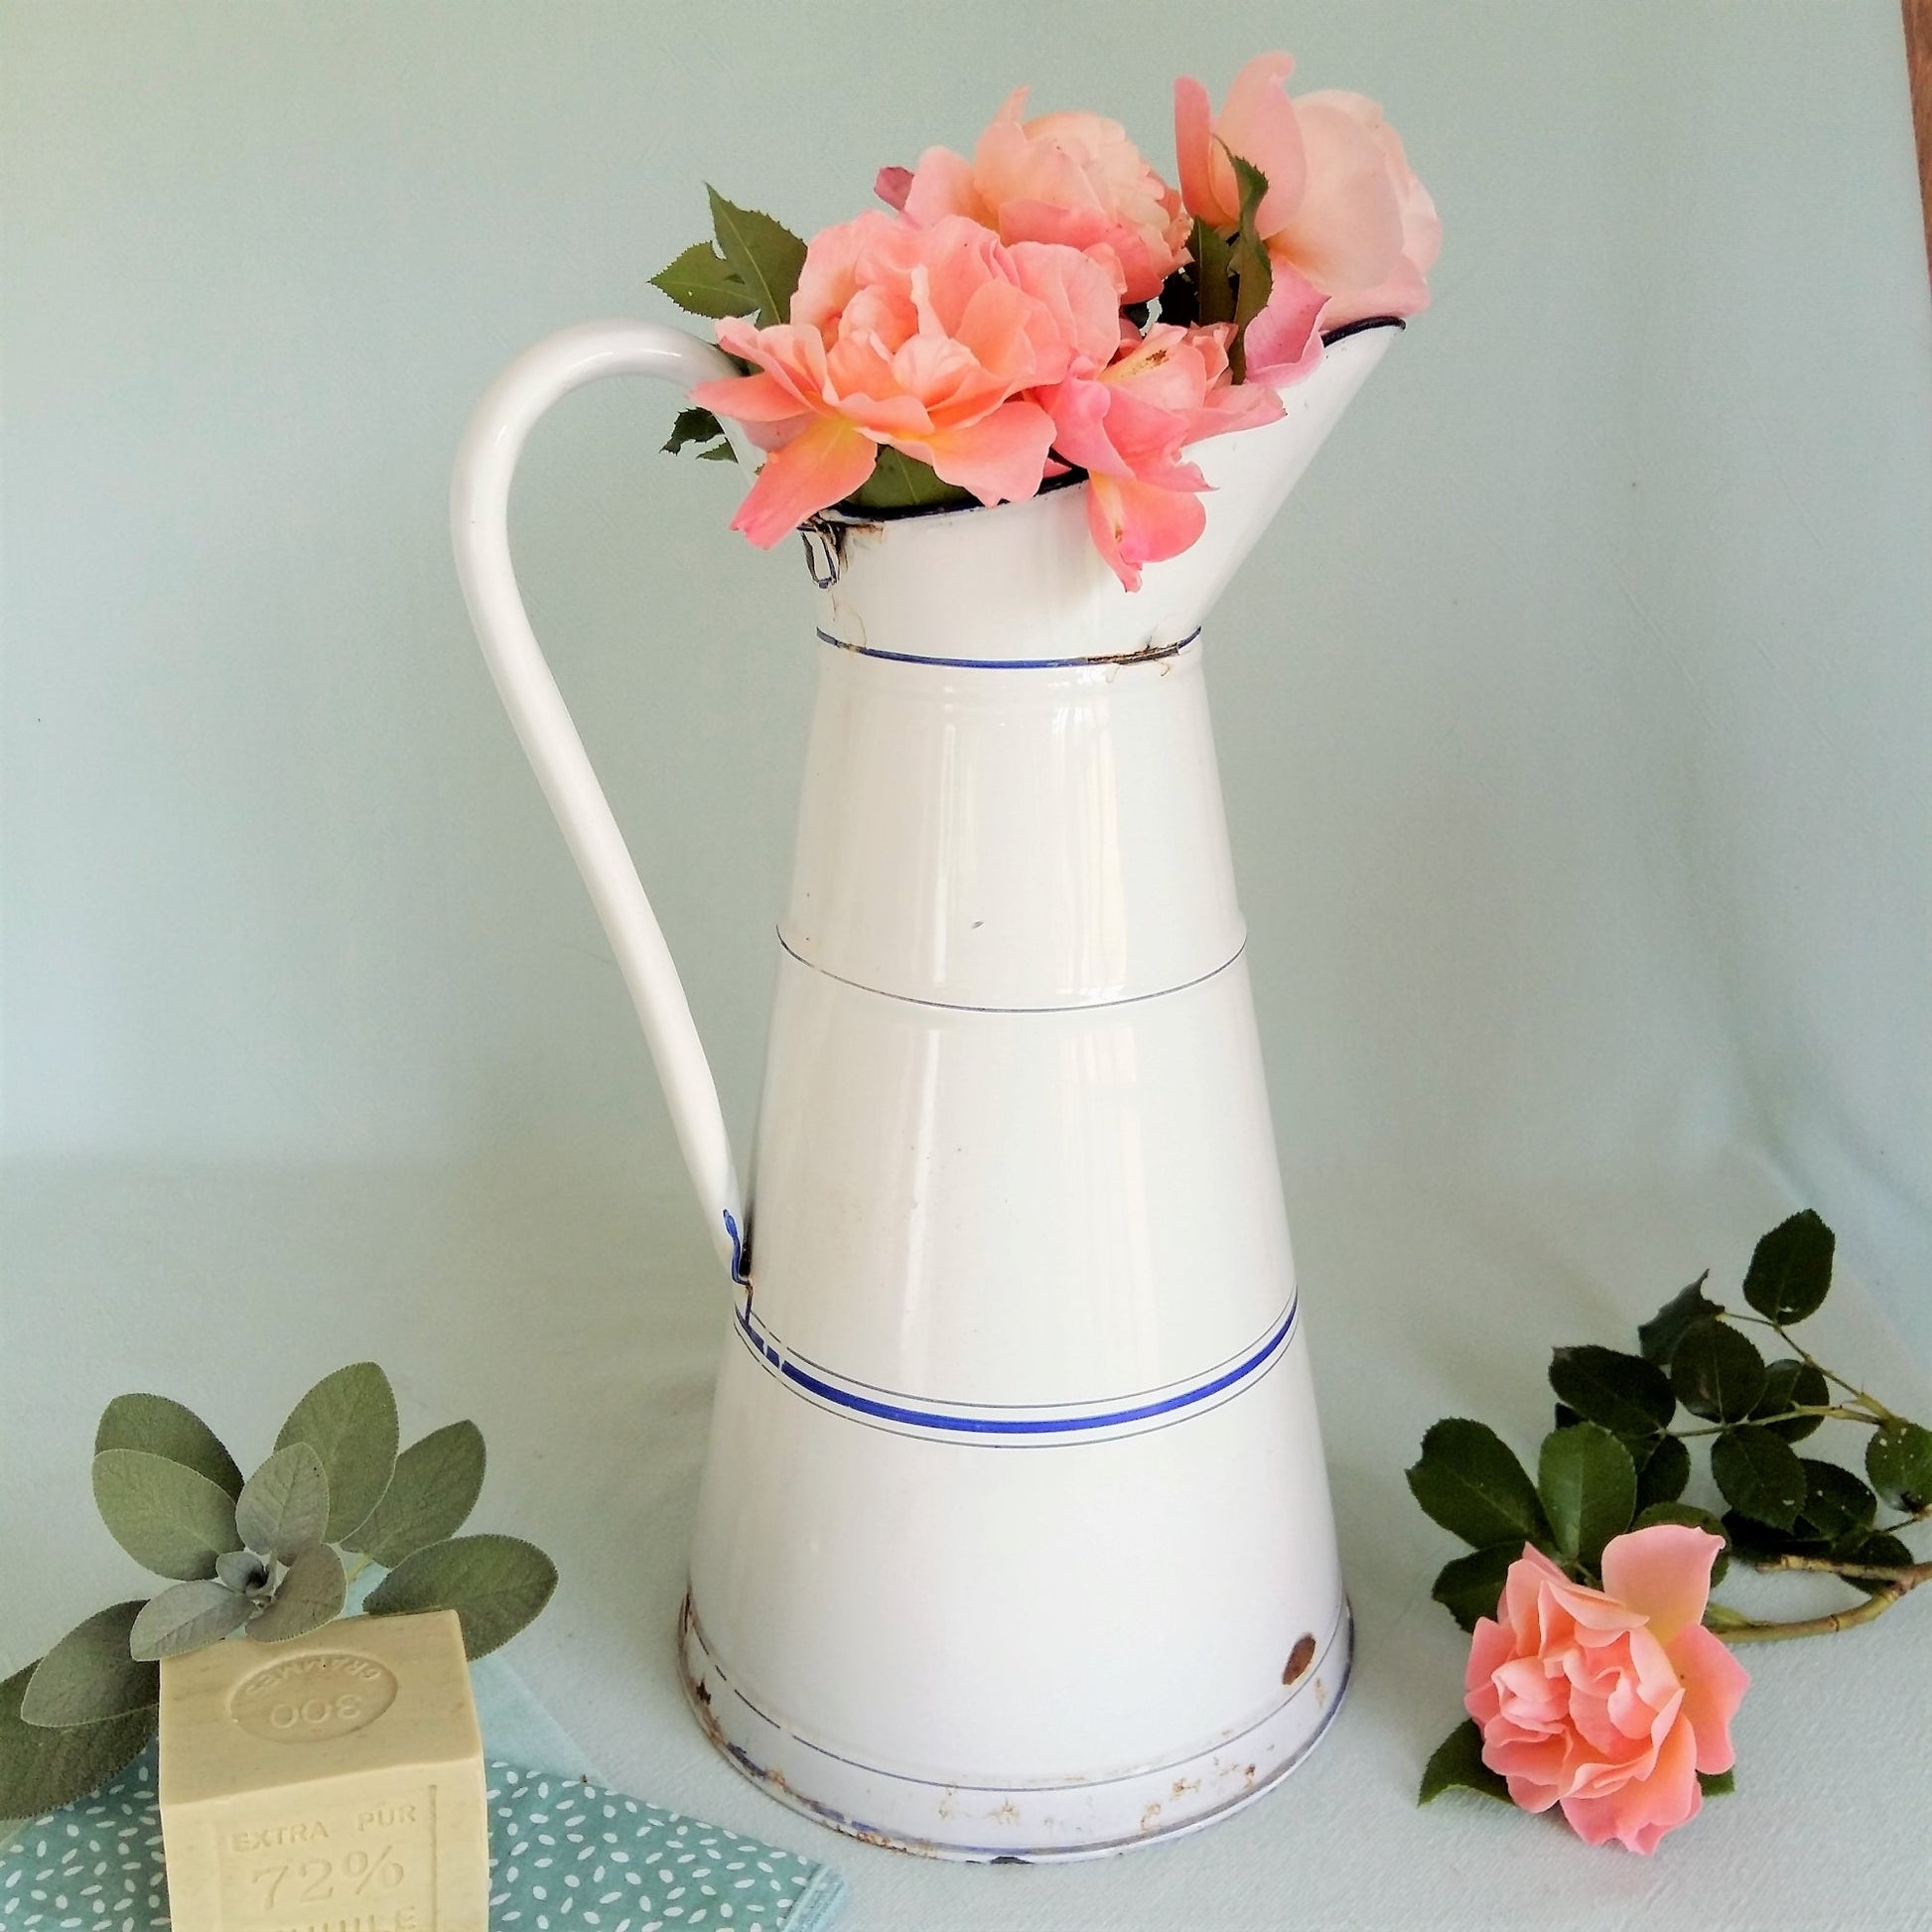 Large, antique white enamel pitcher from Tiggy and Pip. 129€ with FREE worldwide shipping.